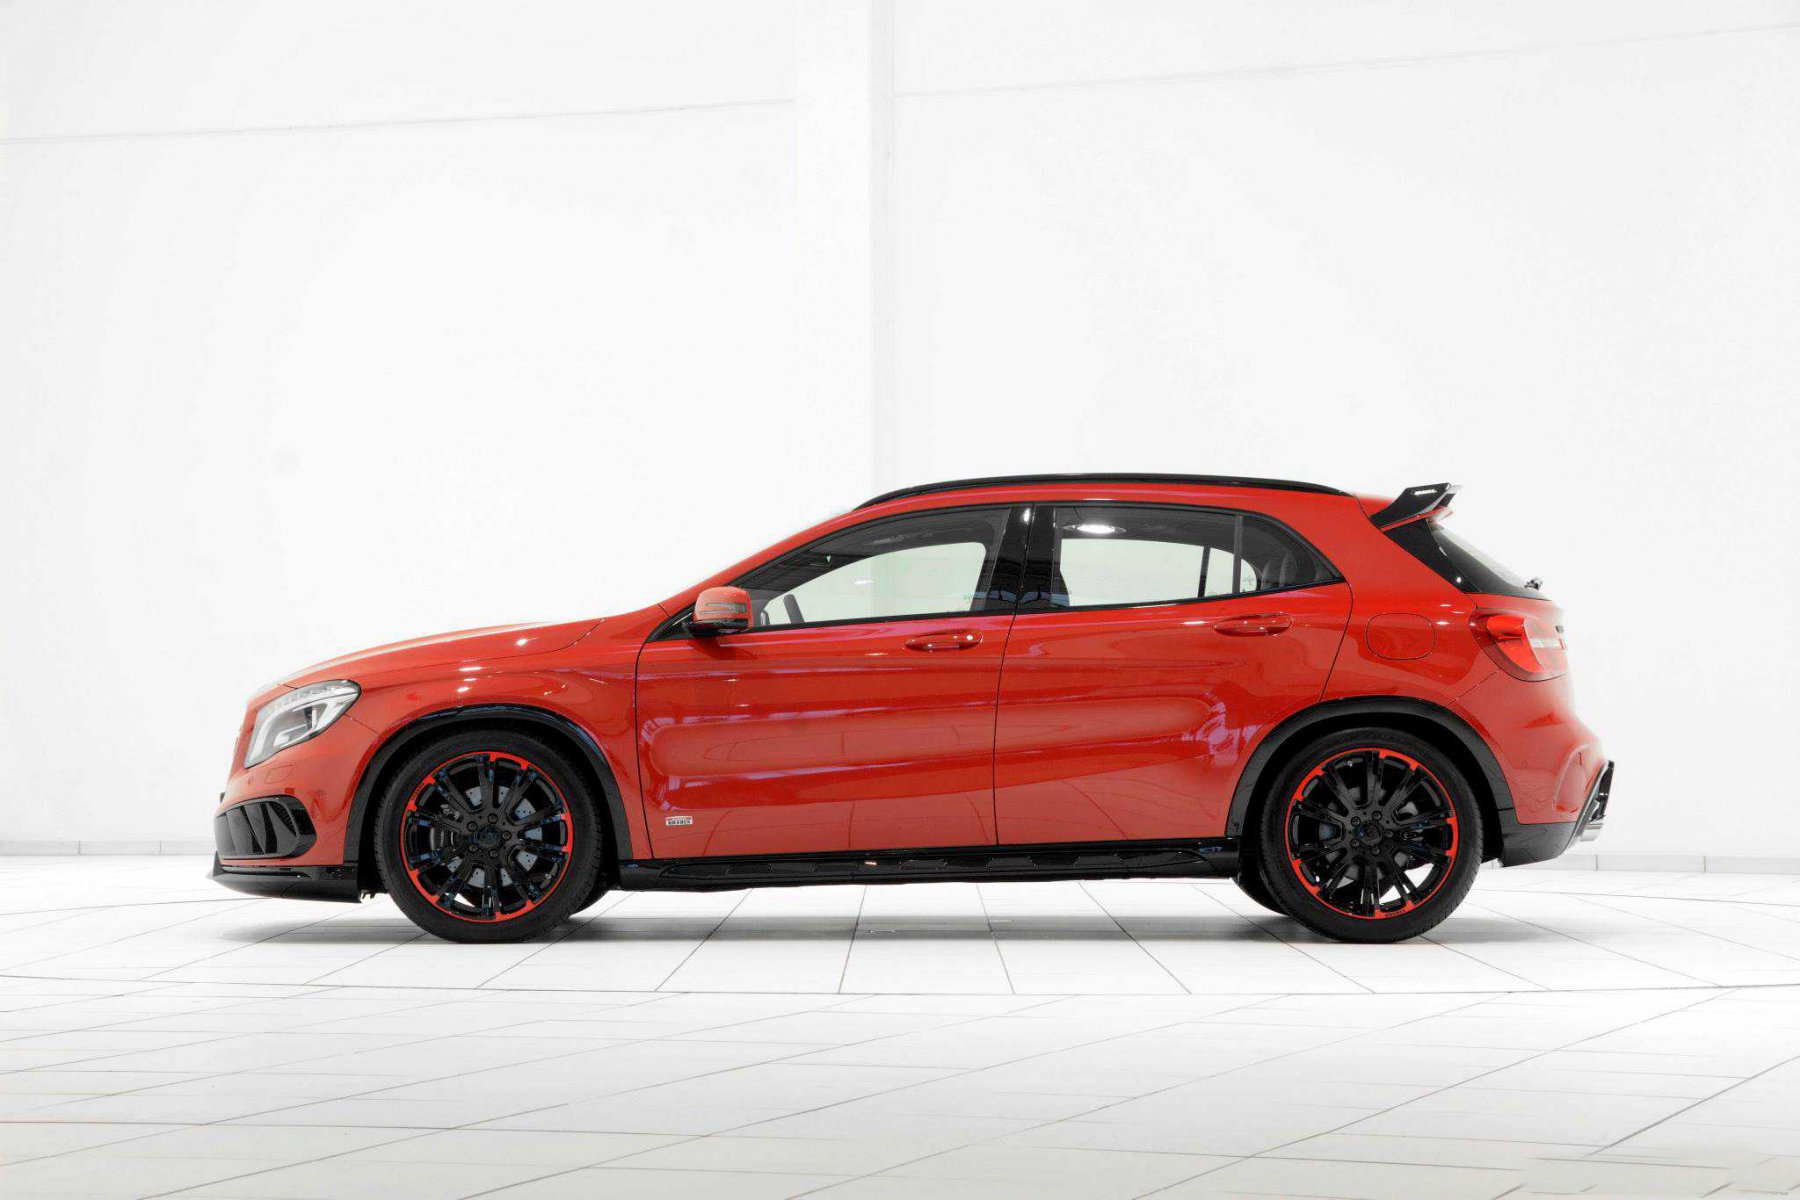 1441128619brabus-tuned-mercedes-gla-looks-stunning-in-red-and-black-gets-diesel-power-boost_17